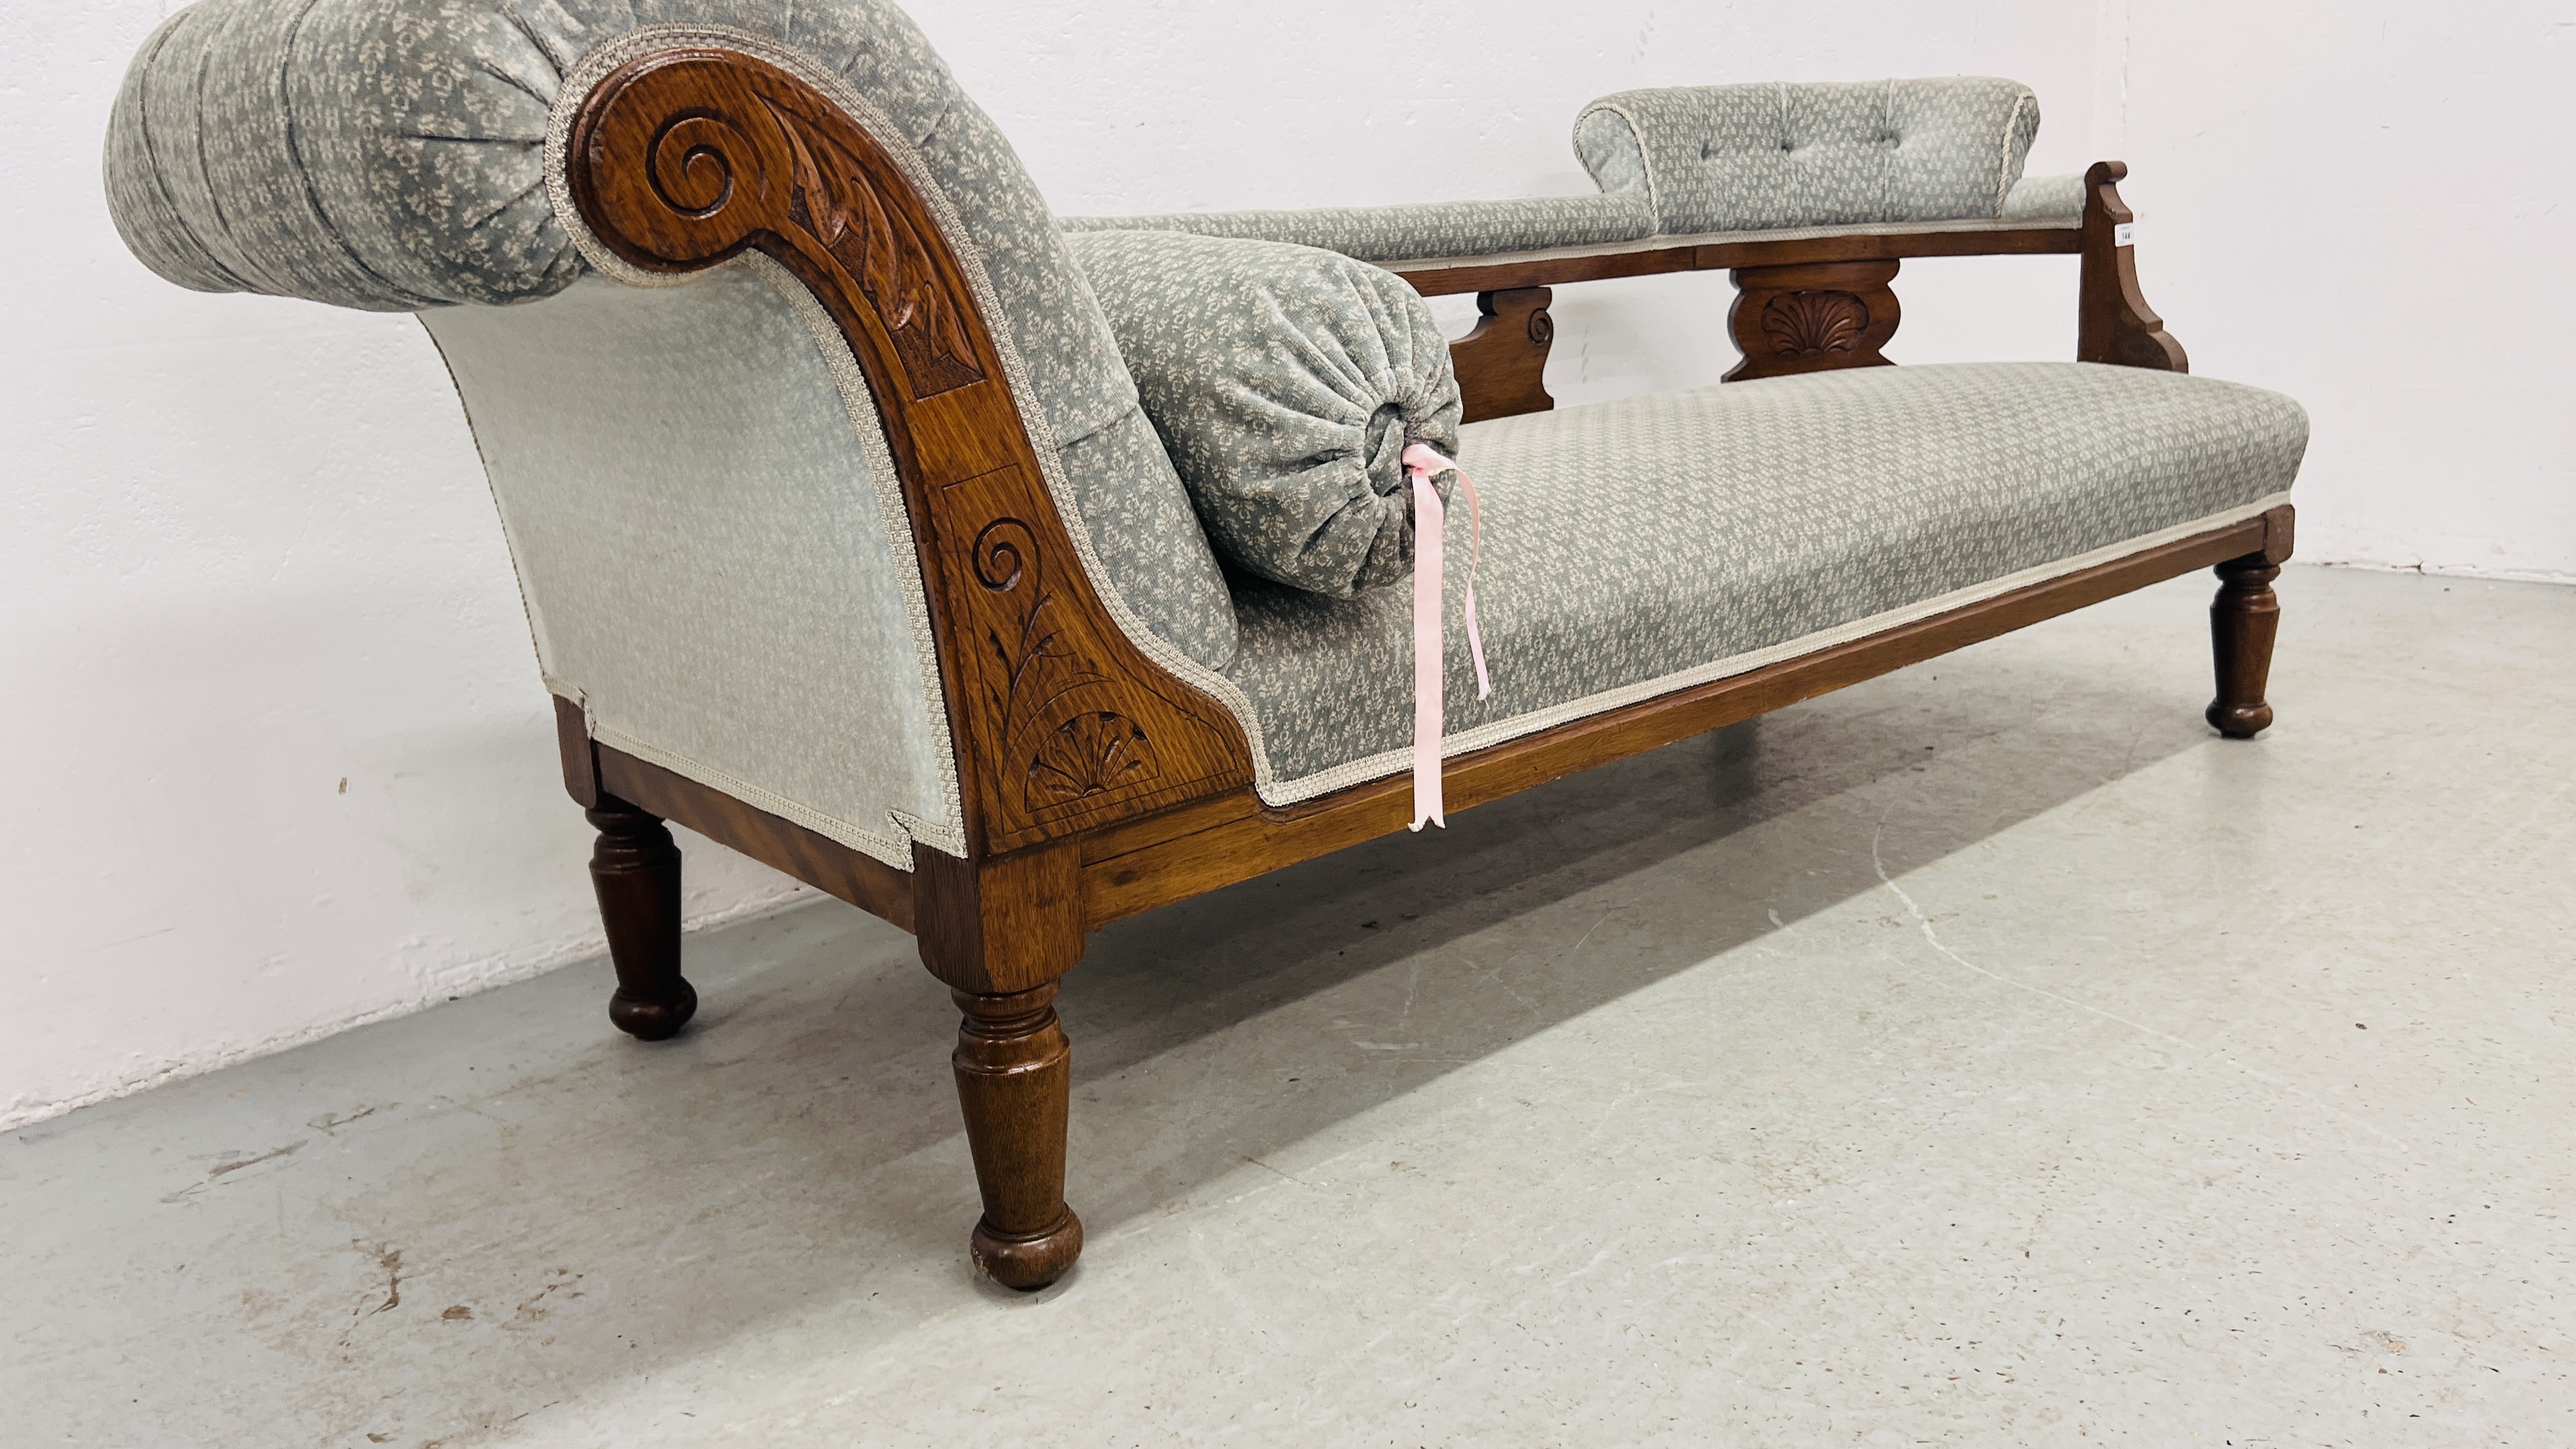 AN EDWARDIAN OAK CHAISE LONGUE UPHOLSTERED IN PASTEL BLUE - Image 8 of 8